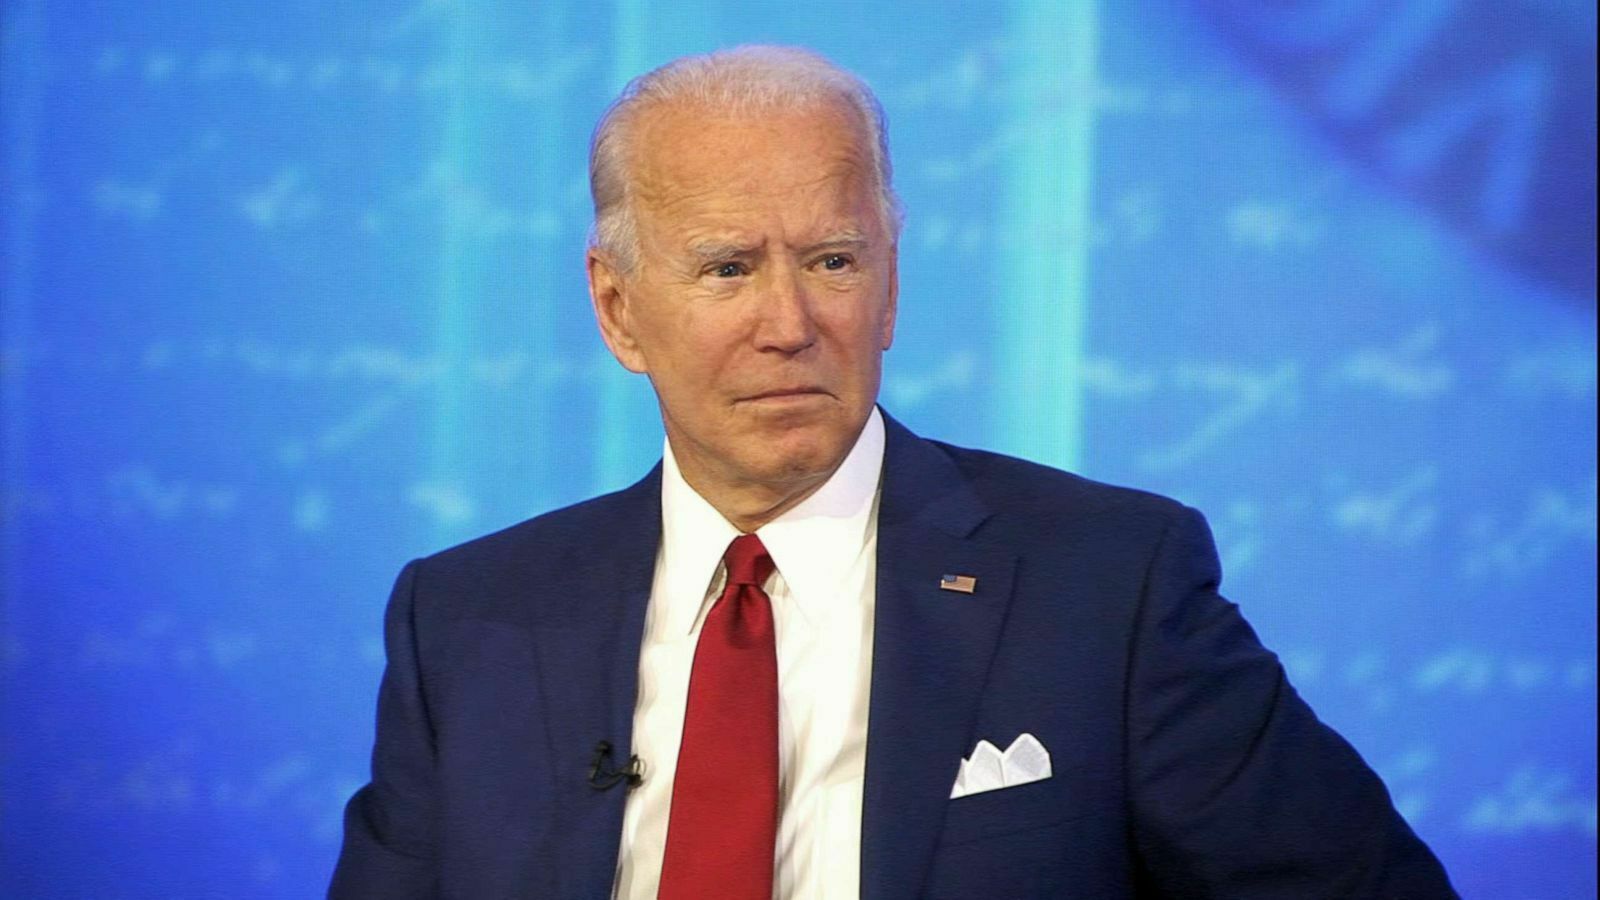 Over 20 specialists demanded Joe Biden to present a list of sanctions in the case of a Russian invasion of Ukraine